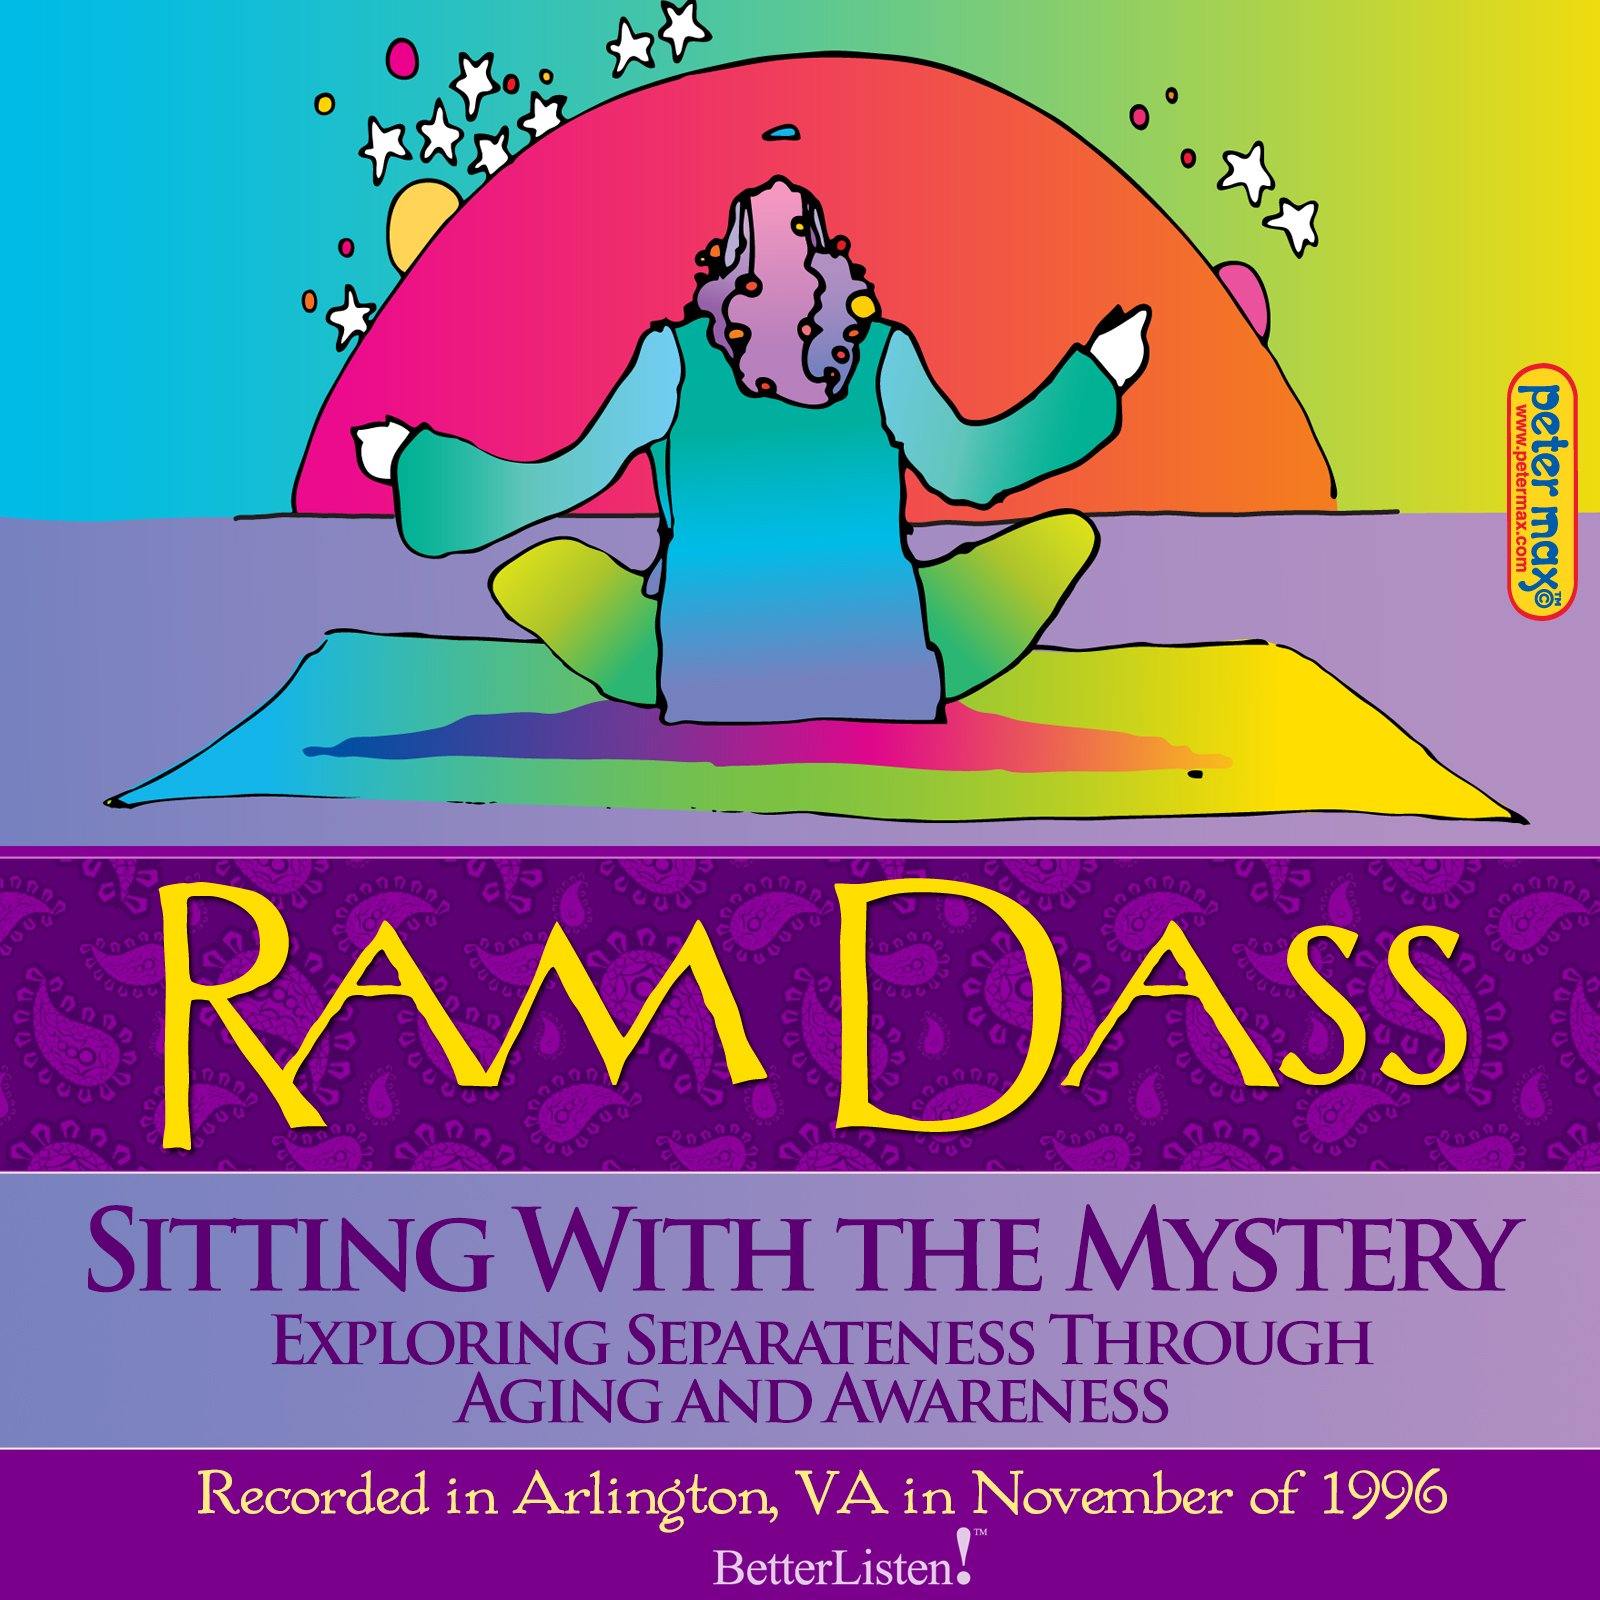 Sitting with the Mystery: Exploring Separateness through Aging and Awareness with Ram Dass Audio Program Ram Dass LSR - BetterListen!